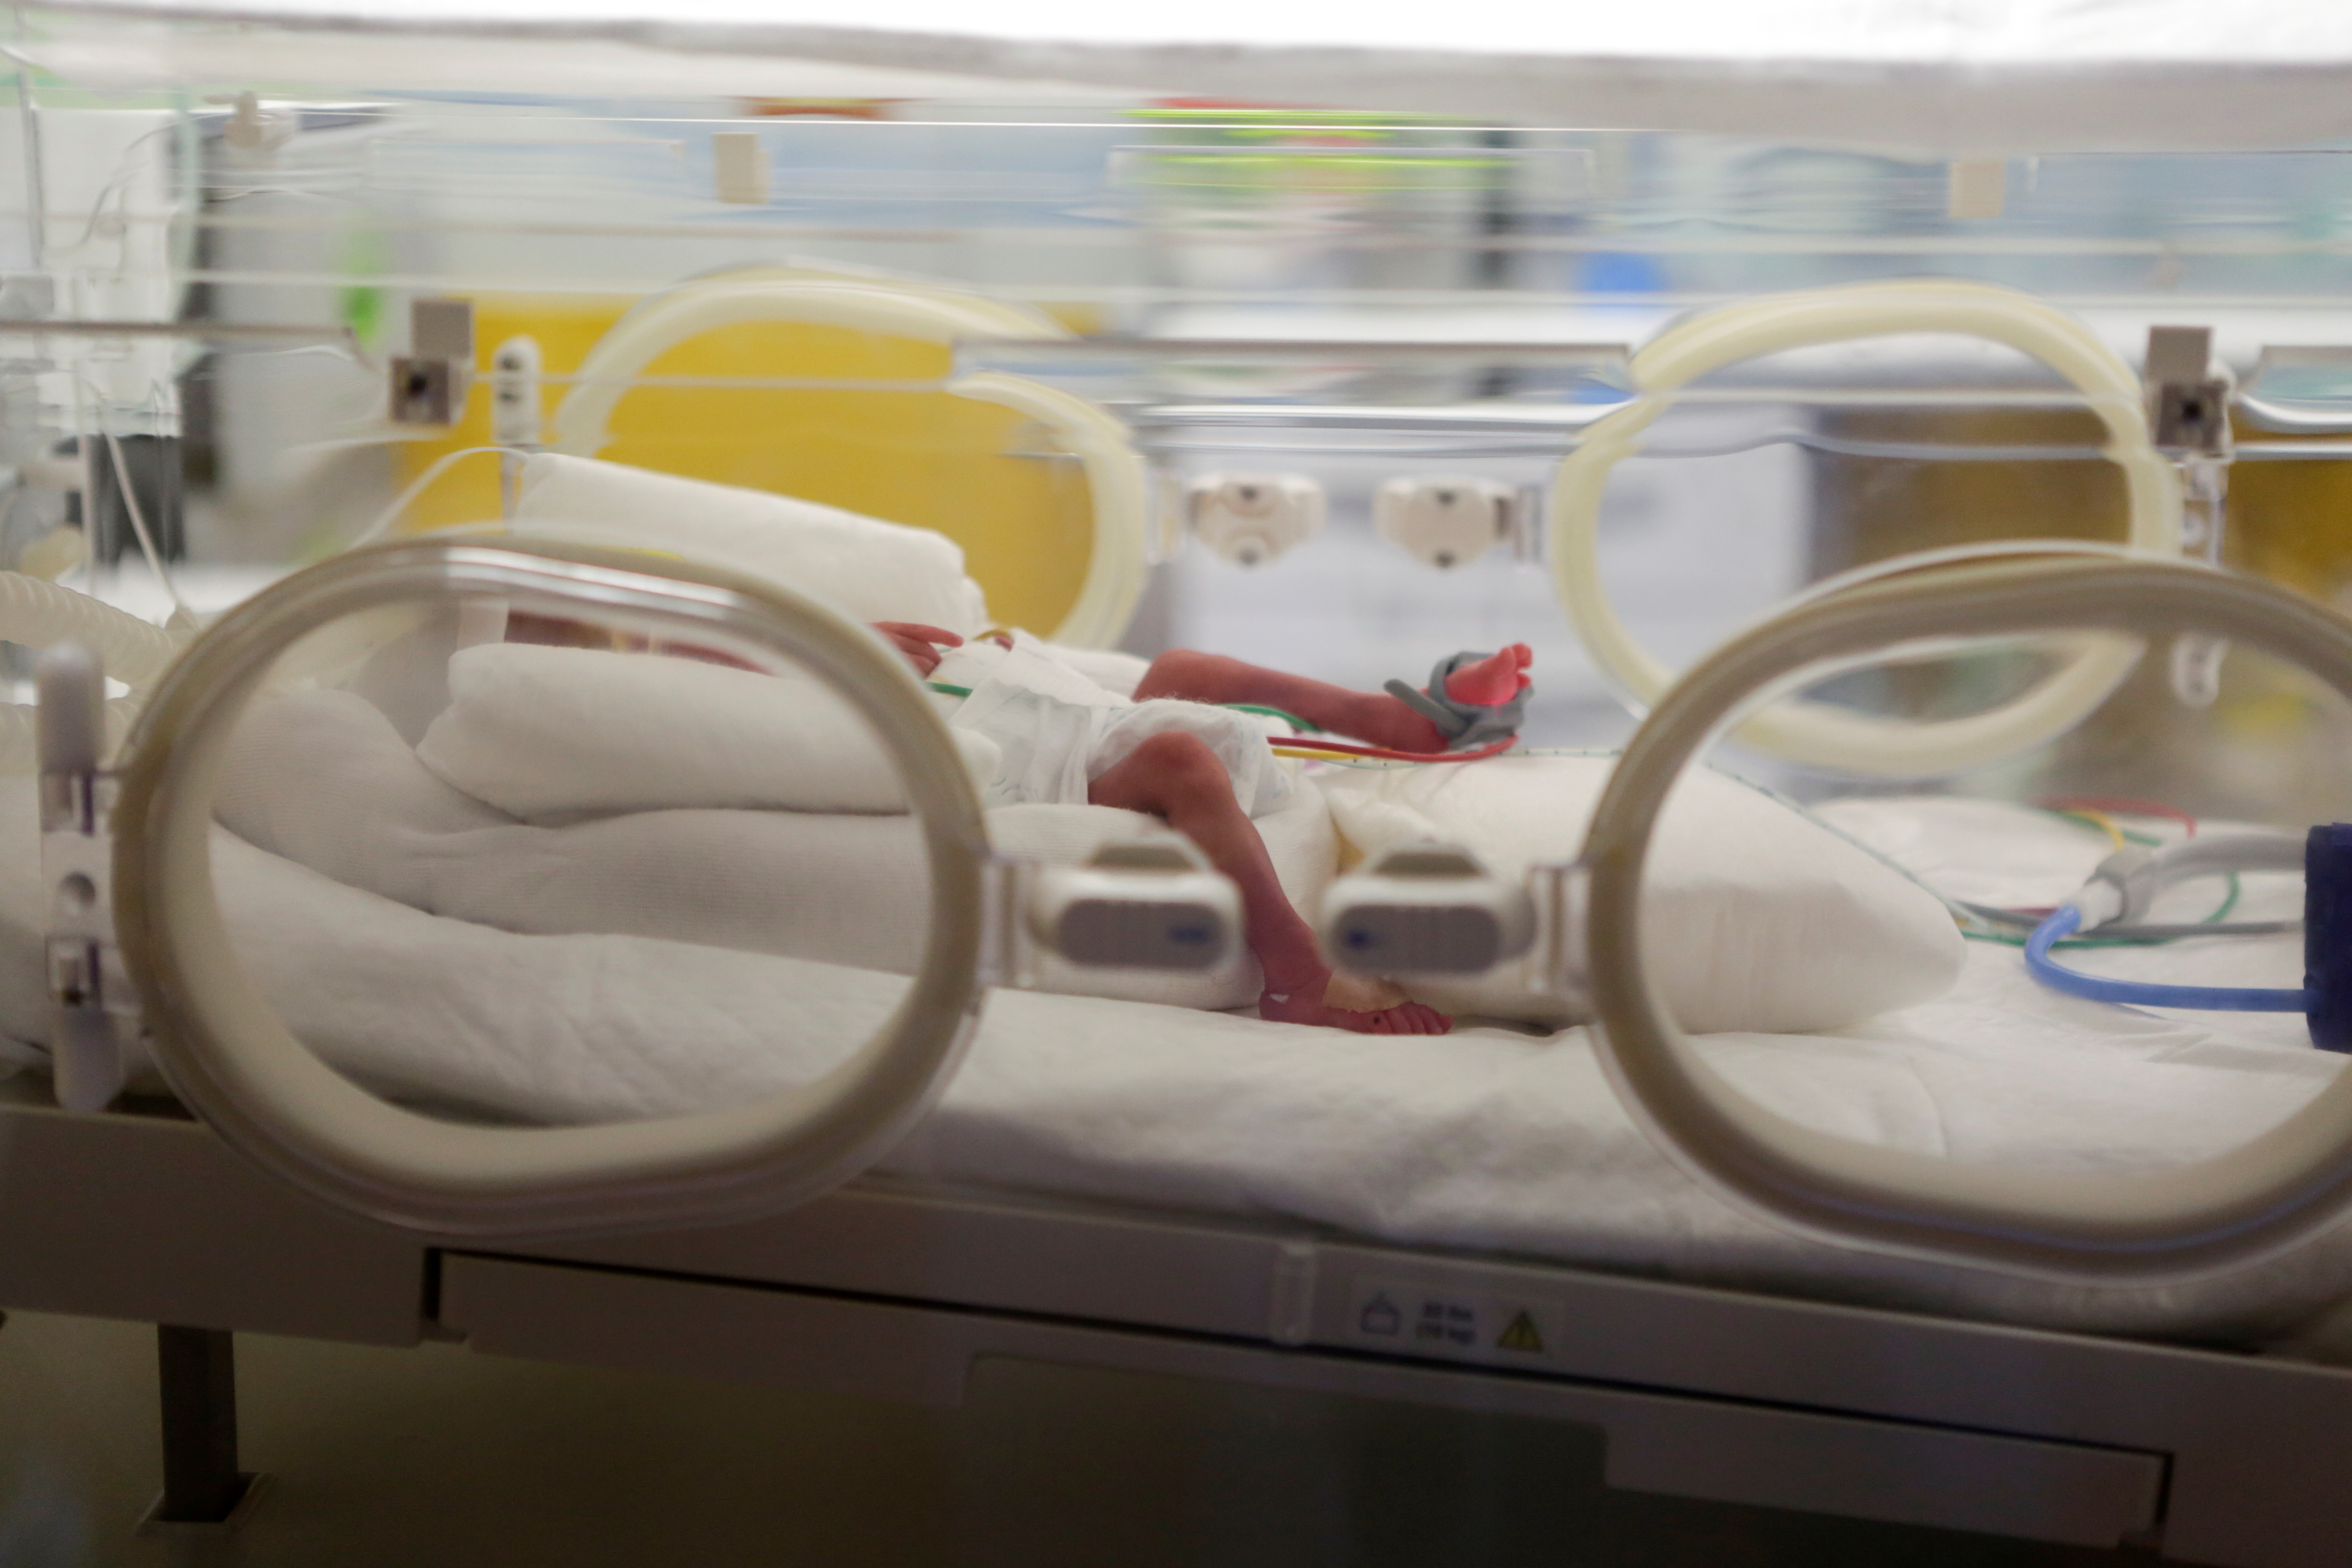 One of the newborn nonuplets is seen in an incubator at the private clinic of Ain Borja, in Casablanca